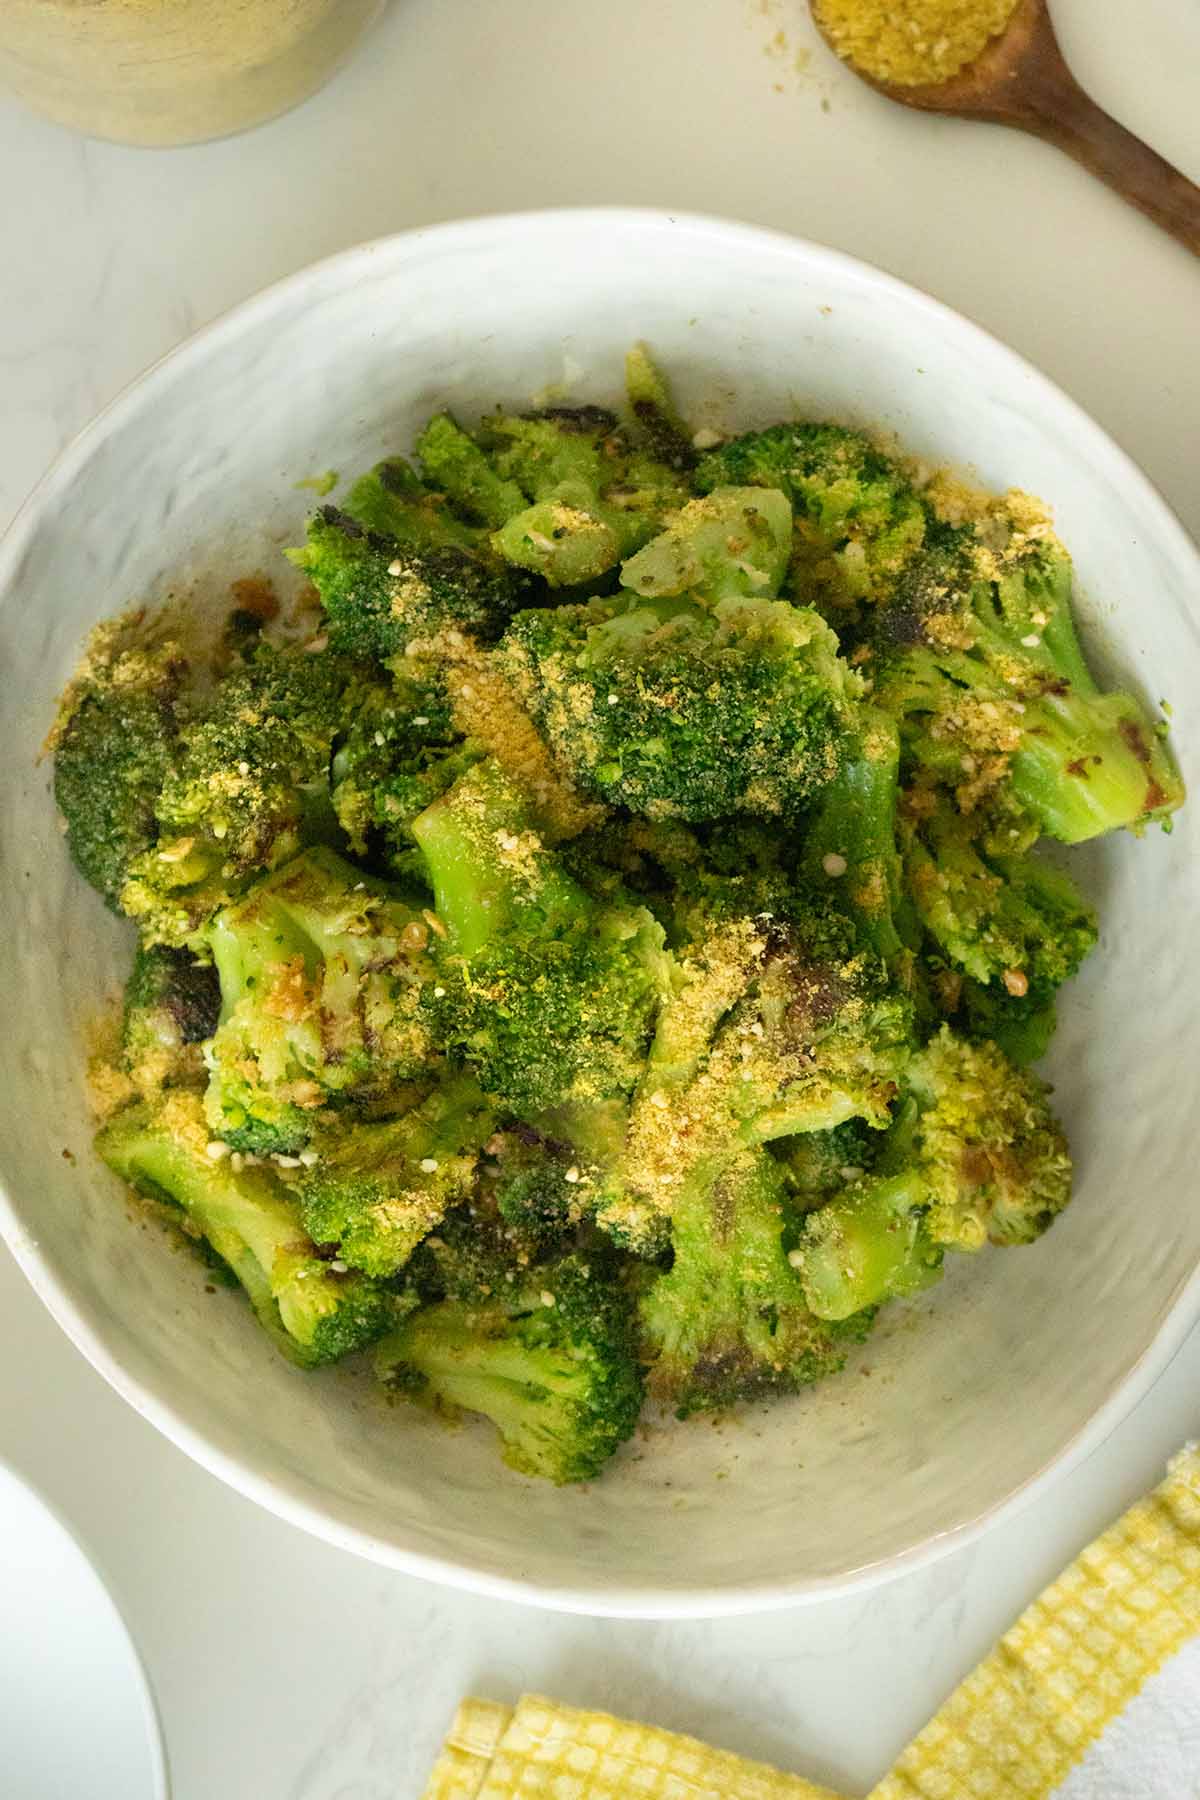 sautéed frozen broccoli in the serving bowl